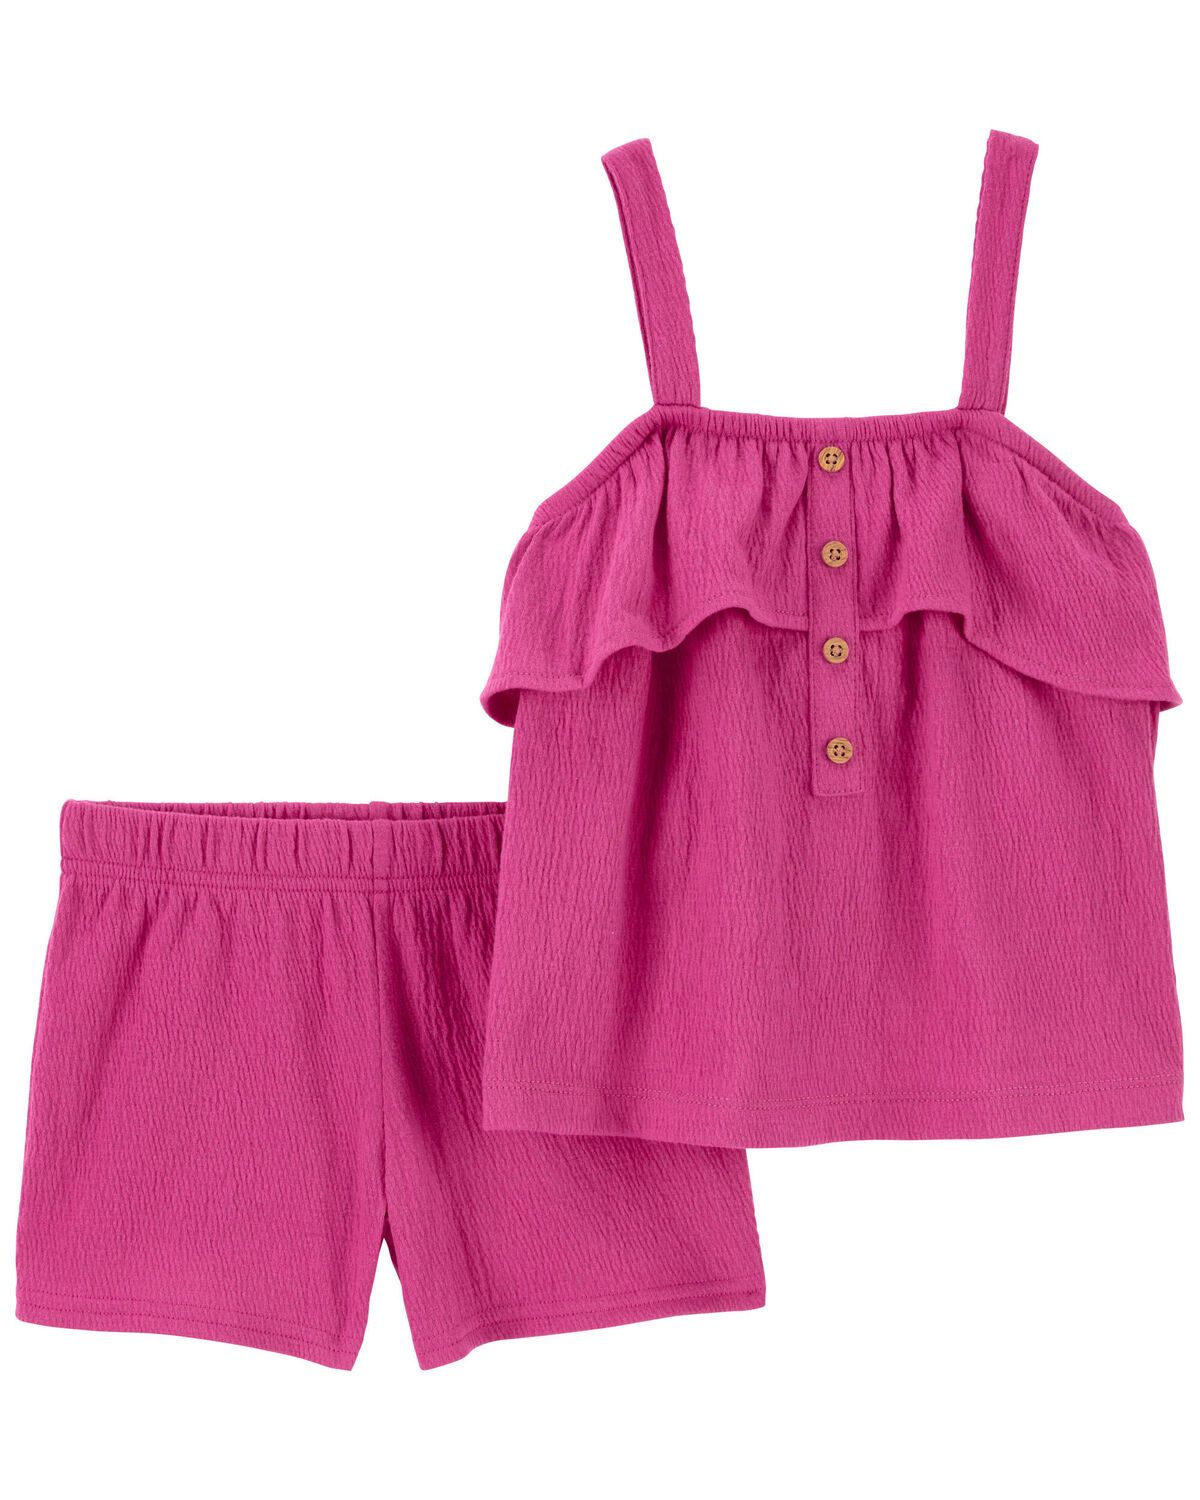 Toddler 2-Piece Crinkle Jersey Outfit Set | Carter's